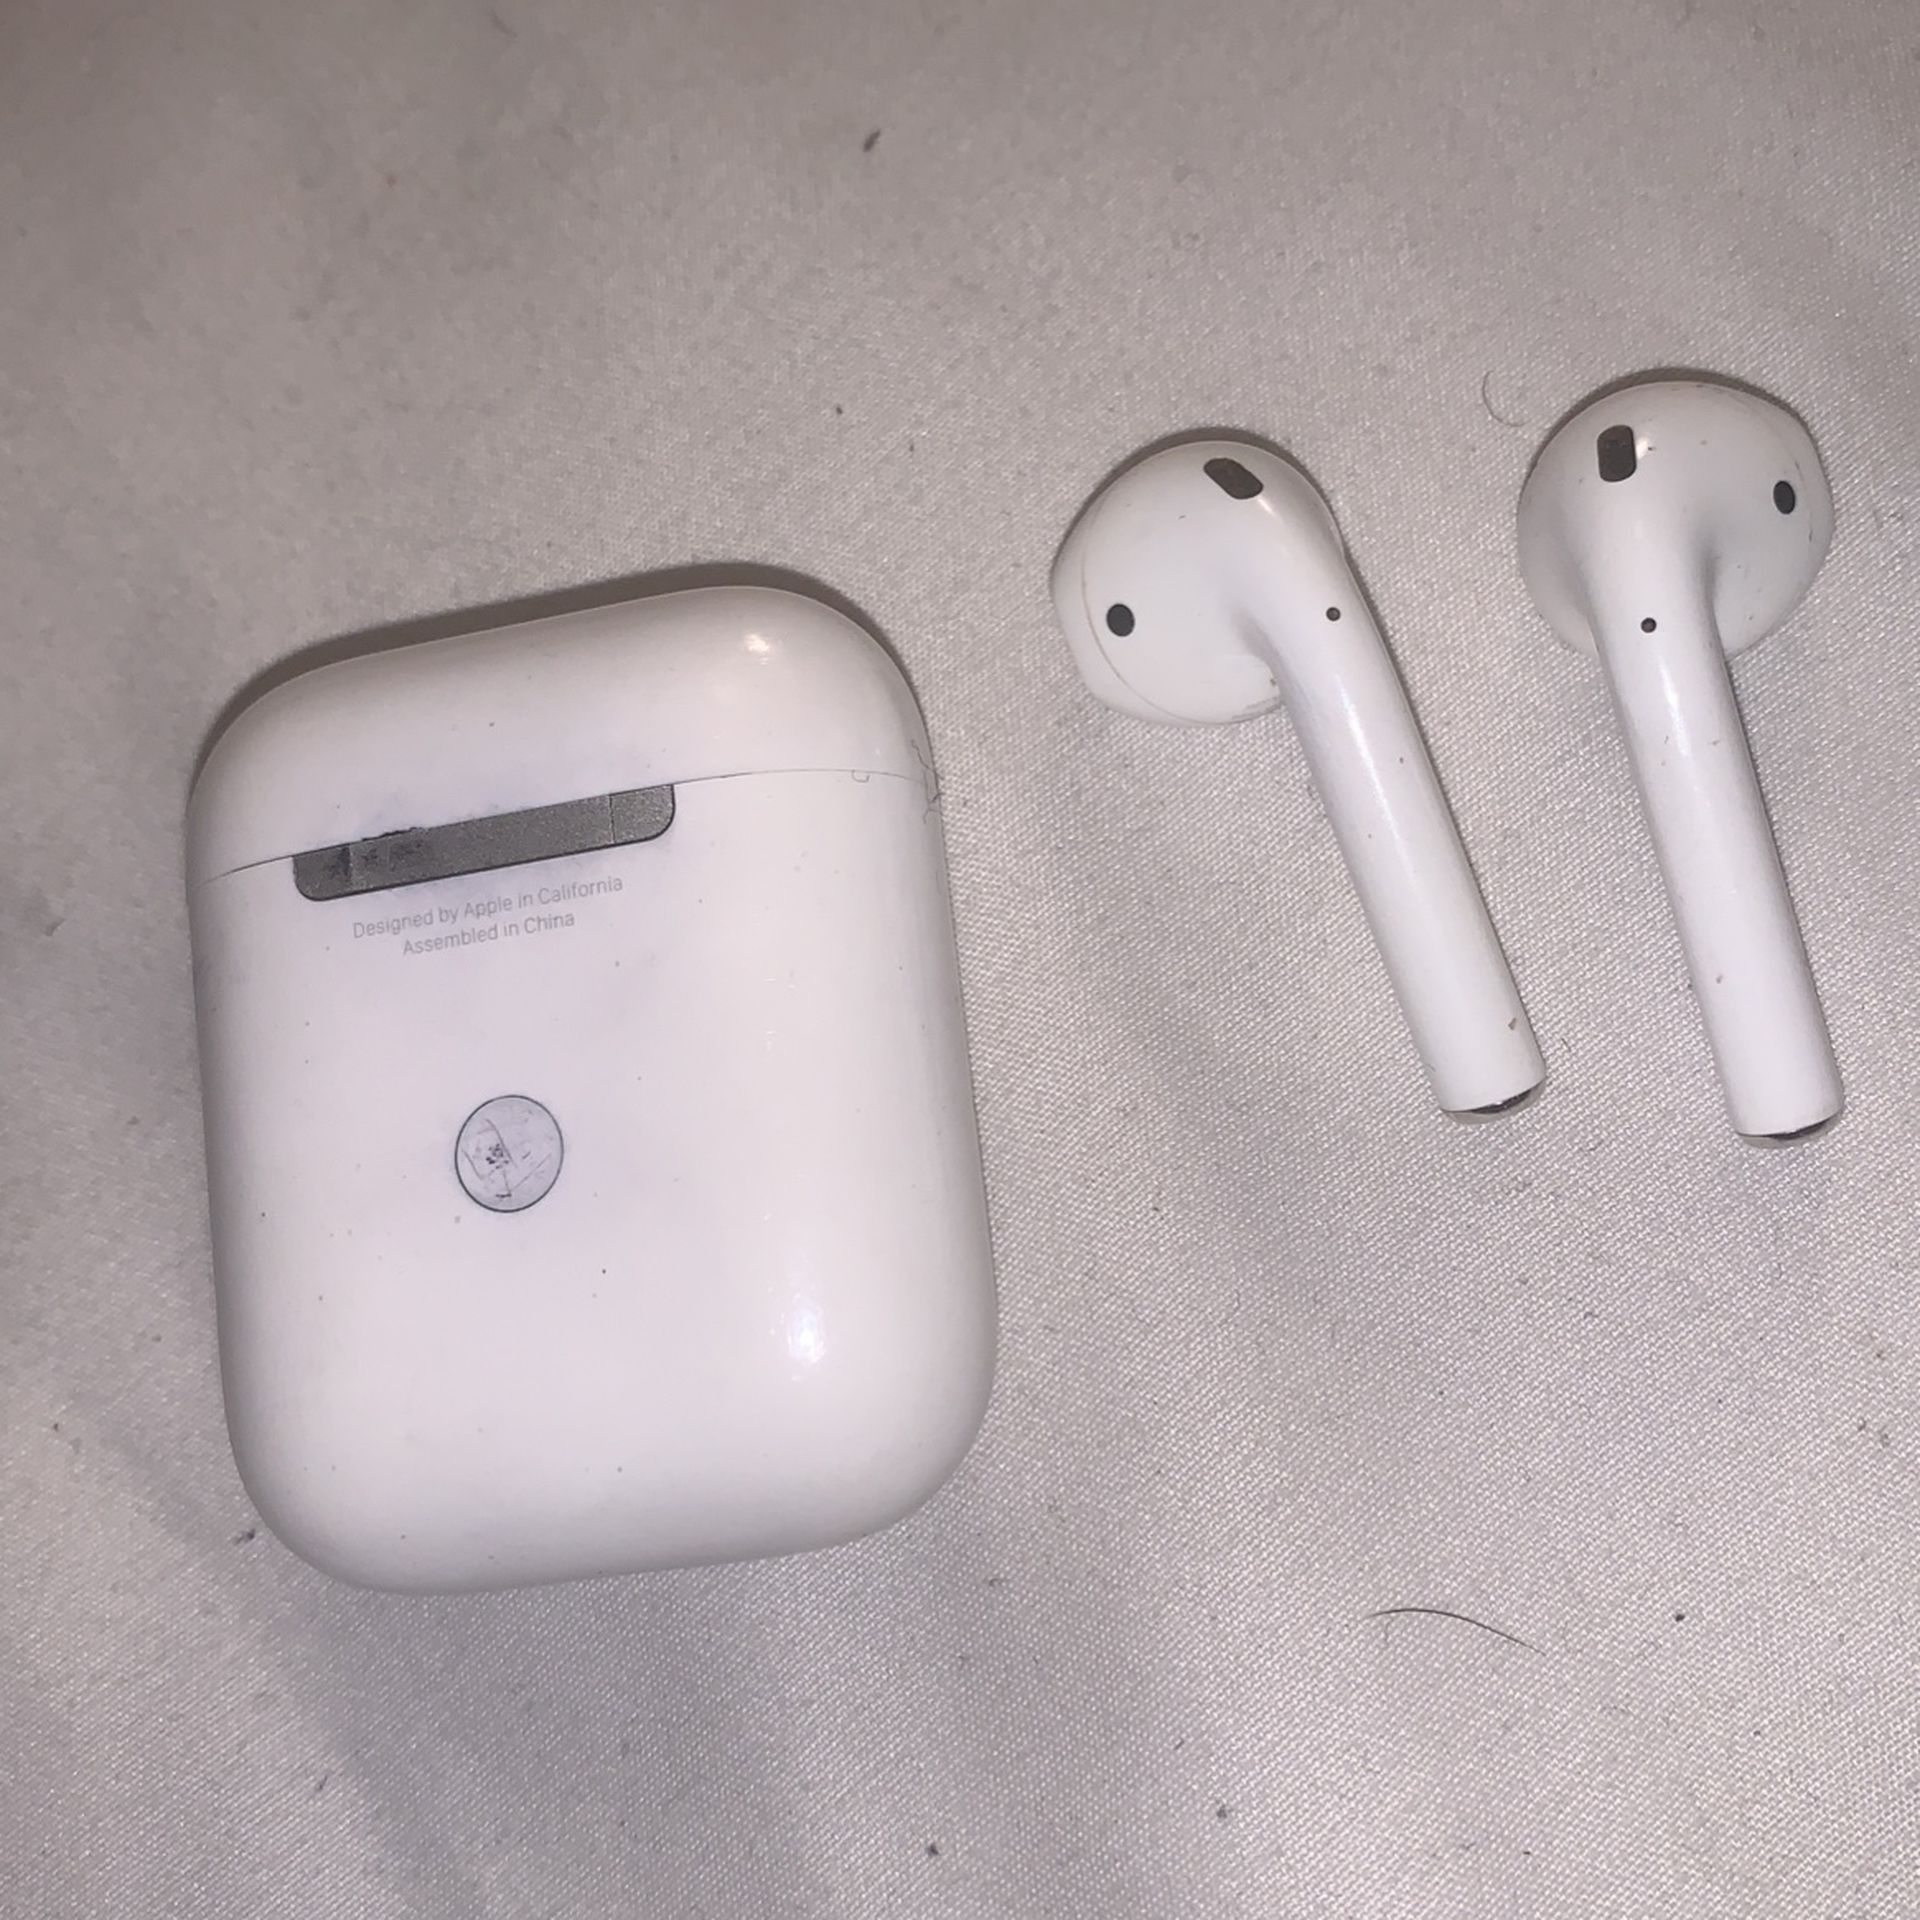 Second generation Airpods